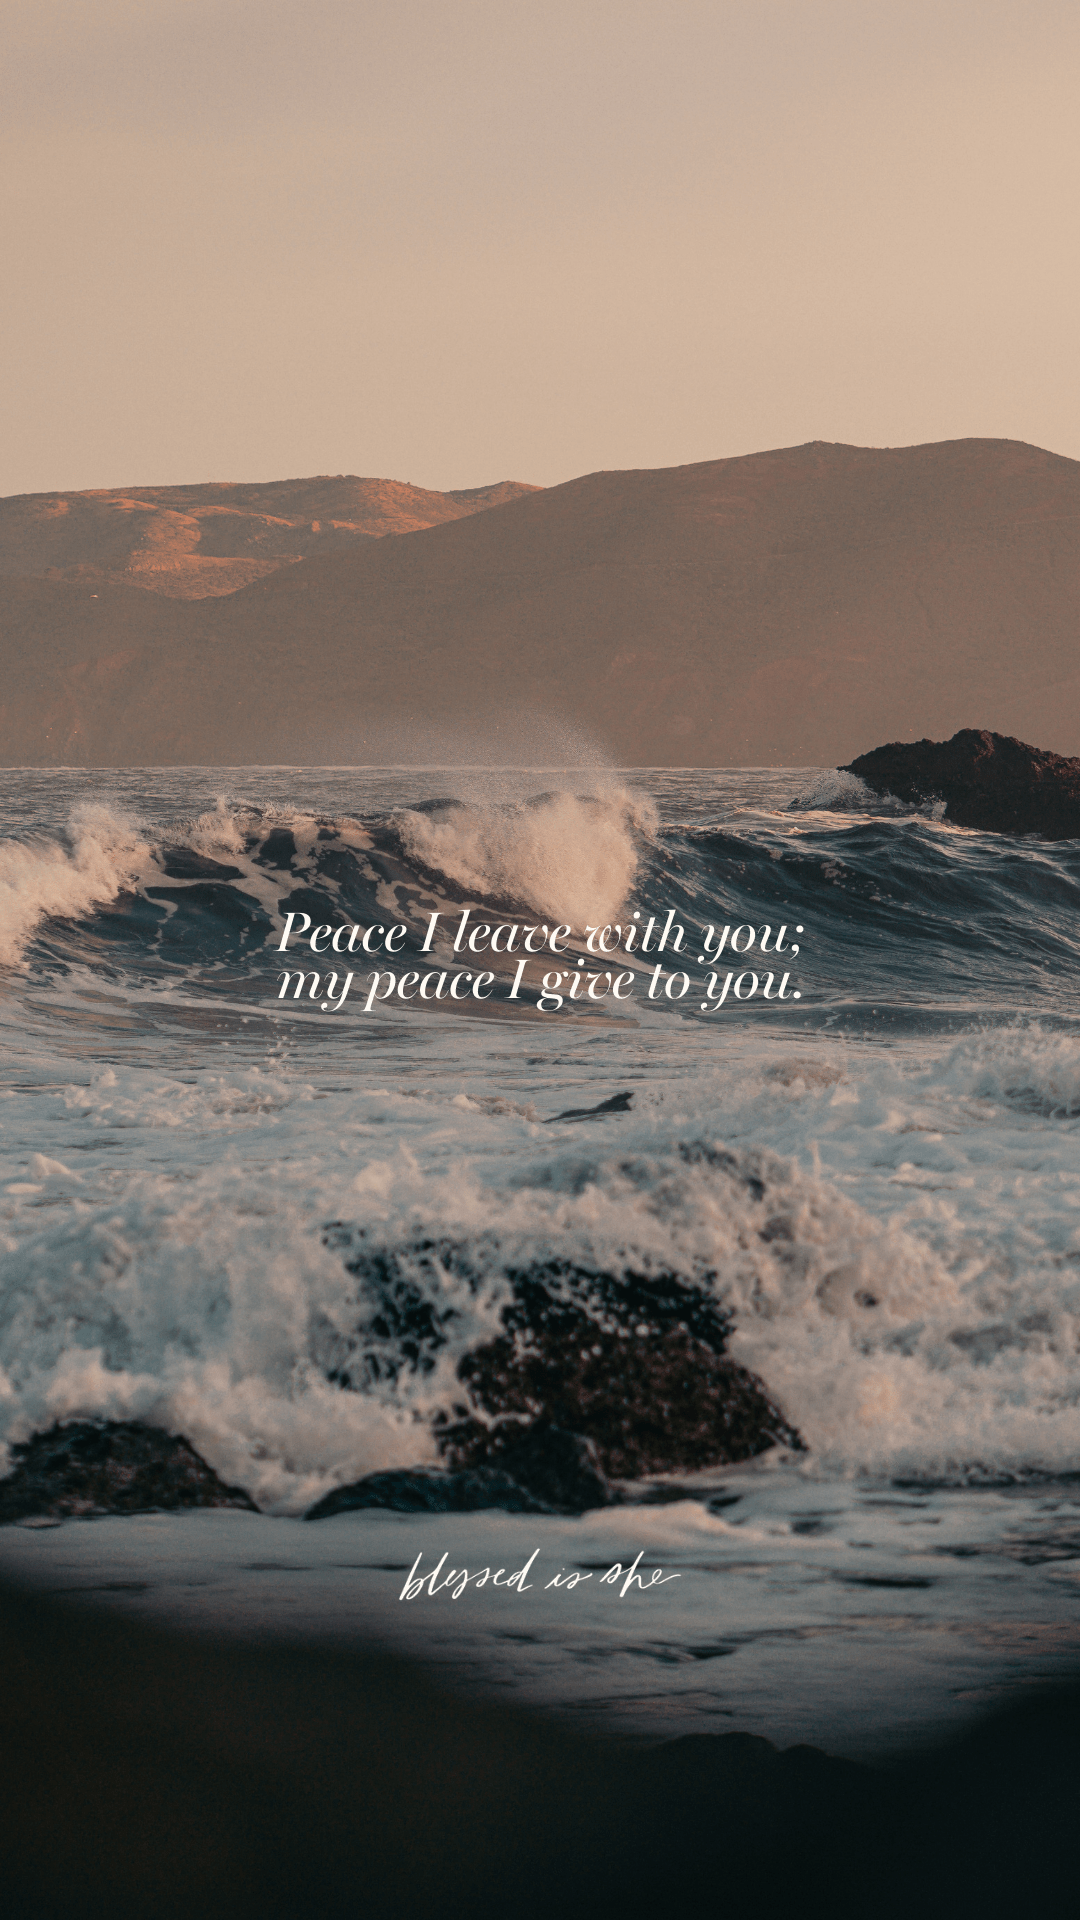 An image of waves crashing on the shore with the words 